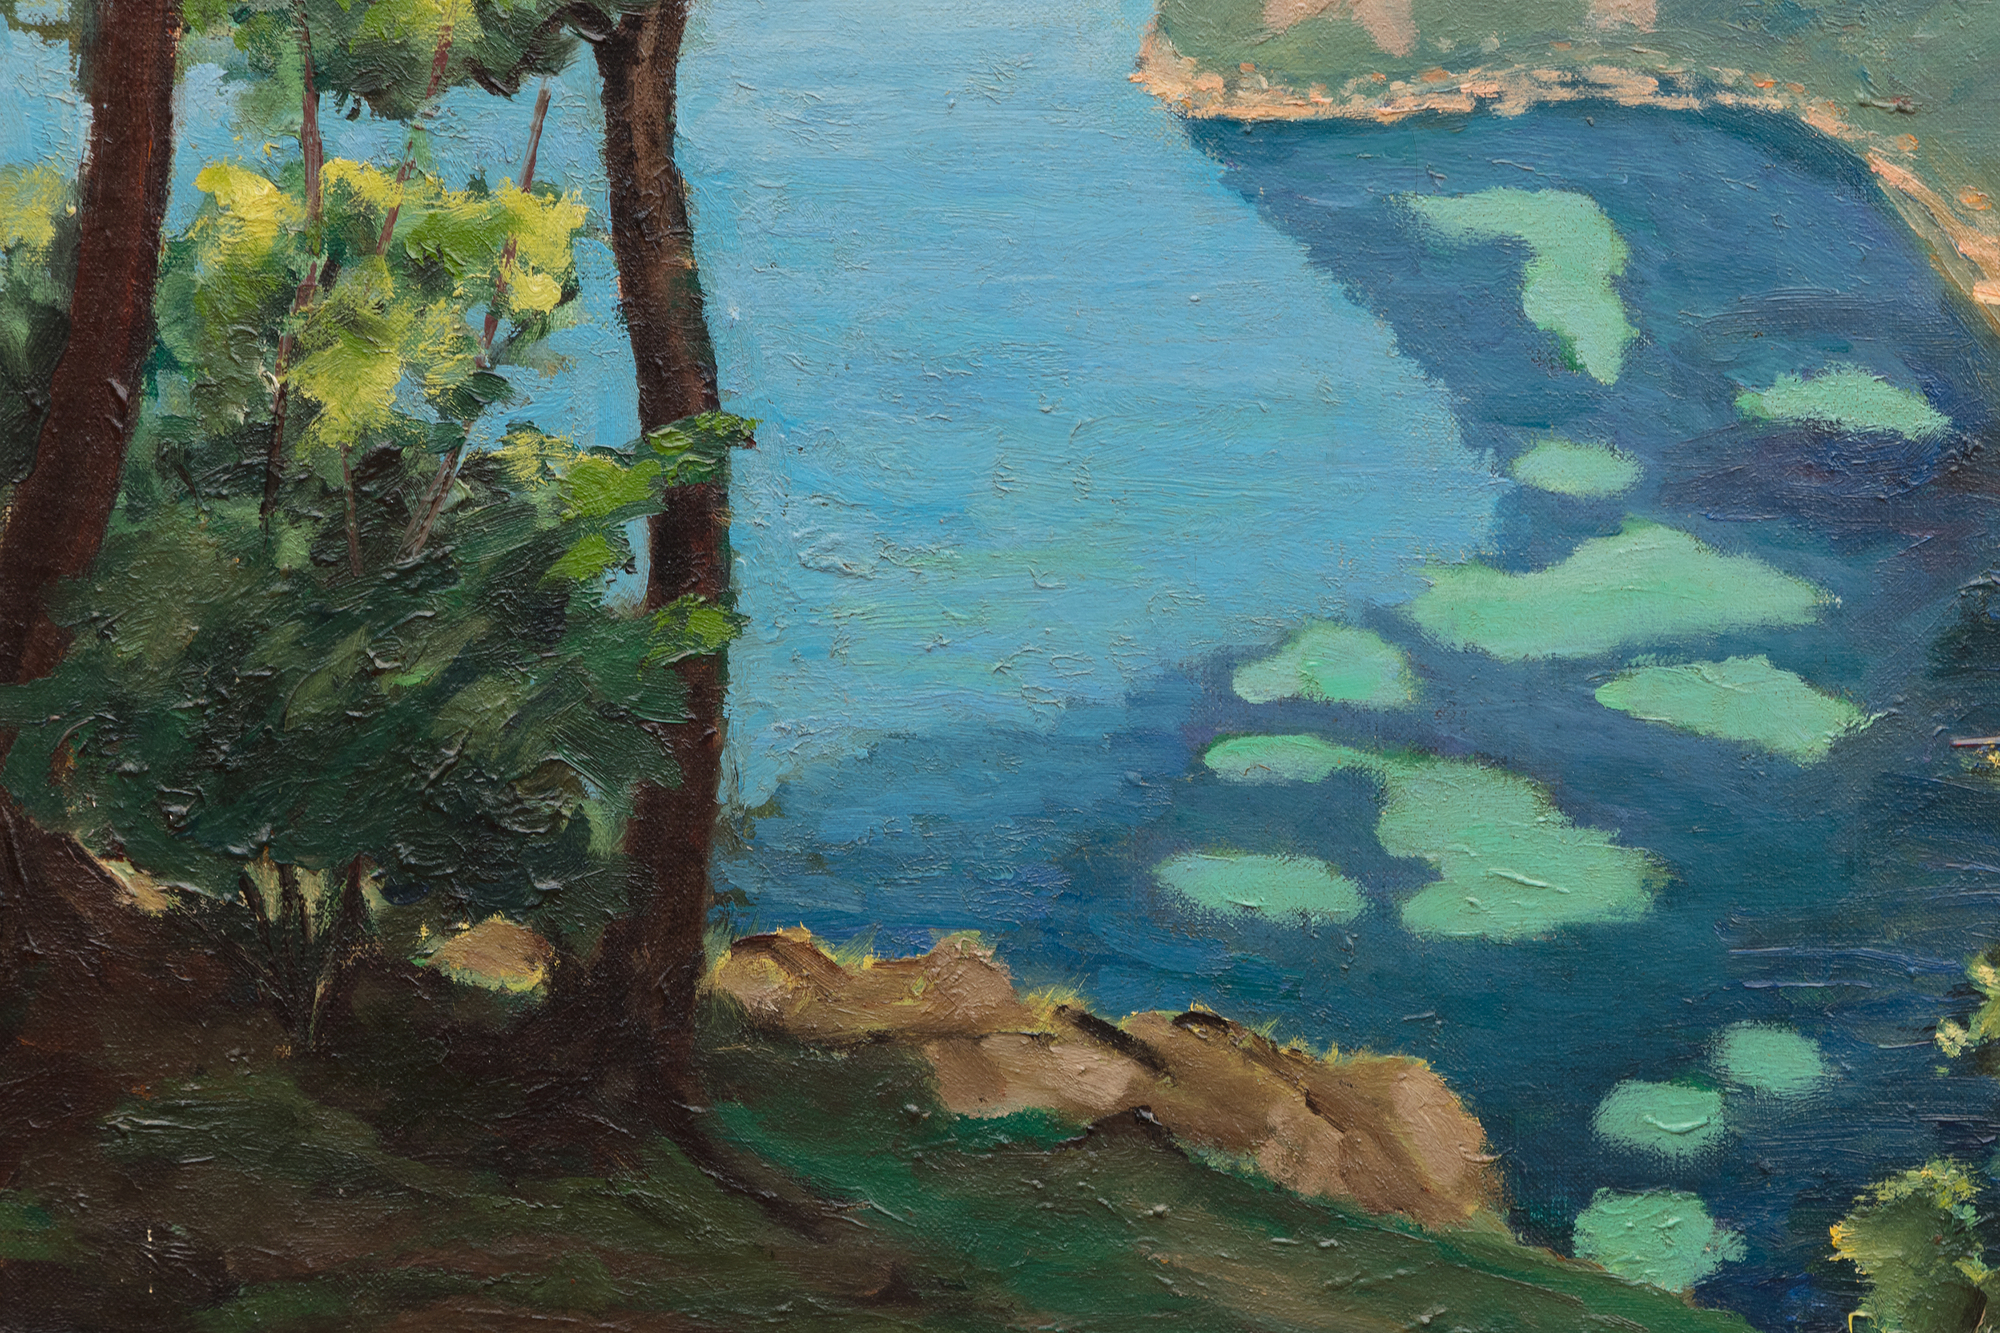 Located on the French Riviera between Nice and Monte Carlo, the Bay of Eze is renowned for its stunning location and spectacular views. As you can see on pages 80-81 of Rafferty's book, this painting skillfully captures the dizzying heights, set just west of Lou Sueil, the home of Jacques and Consuelo Balsan, close friends of Winston and Clementine.
<br> 
<br>The painting manipulates perspective and depth, a nod to the dramatic shifts of artists including Monet and Cézanne, who challenged traditional vantage points of landscapes. The portrait (i.e. vertical) orientation of the canvas combined with the trees, and the rhyming coastline channels the viewer’s gaze. The perceived tilting of the water's plane imbues the painting with dynamic tension.